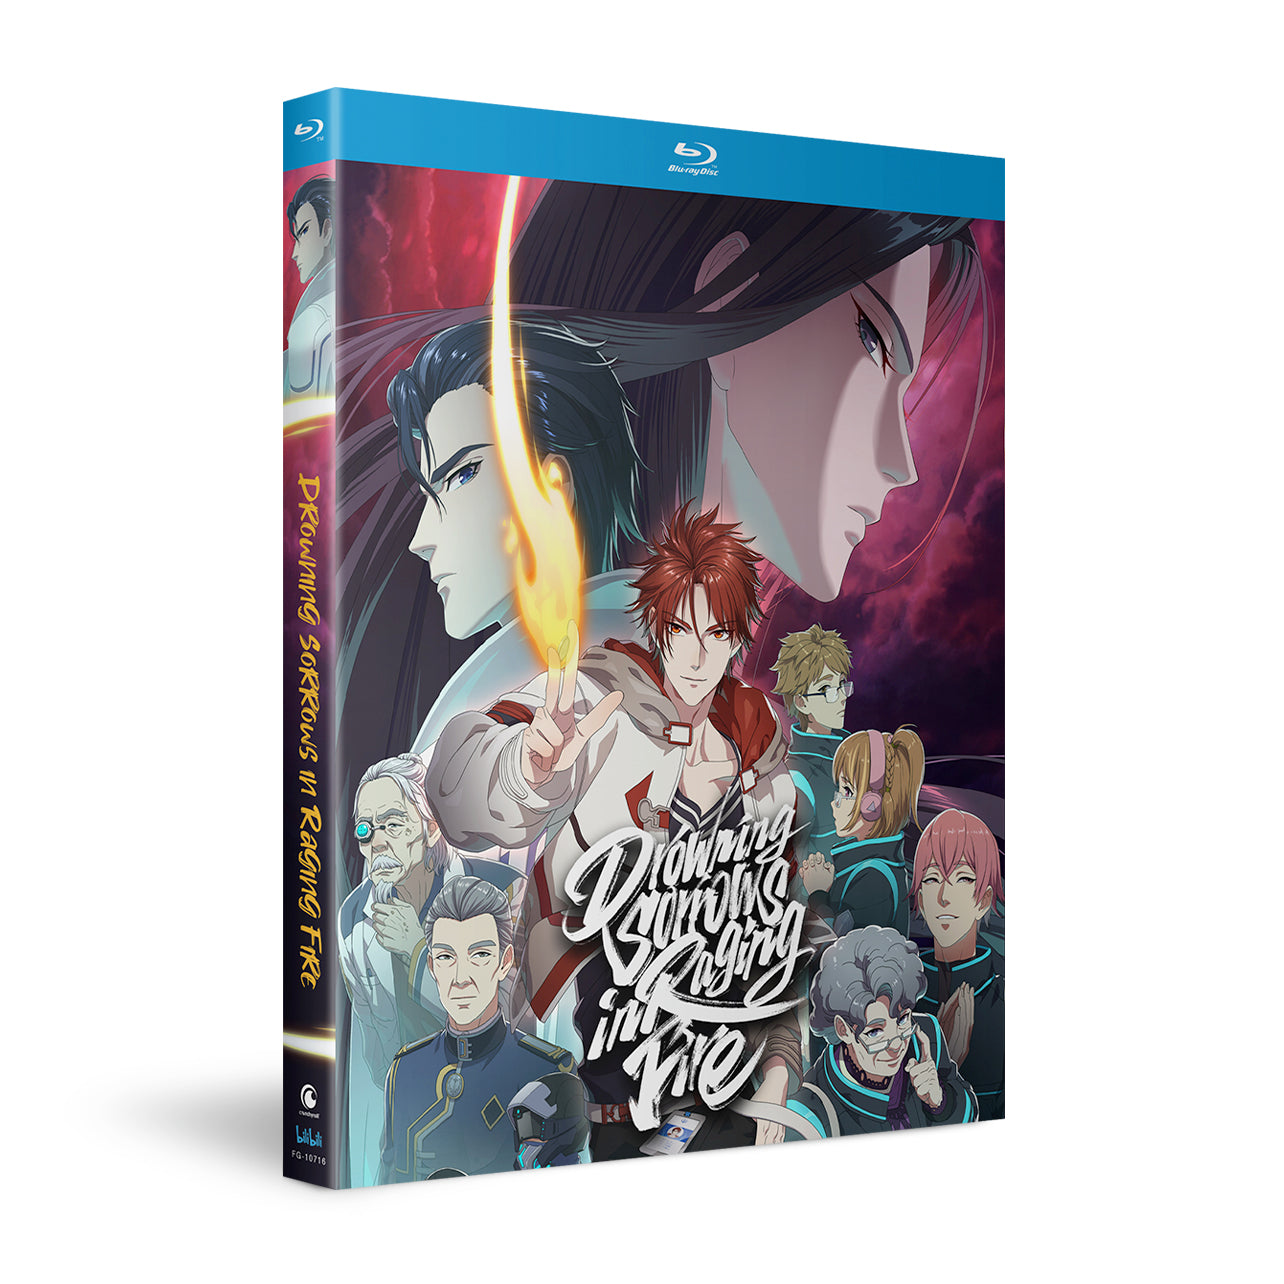 Drowning Sorrows in Raging Fire - The Complete Season - Blu-ray image count 3